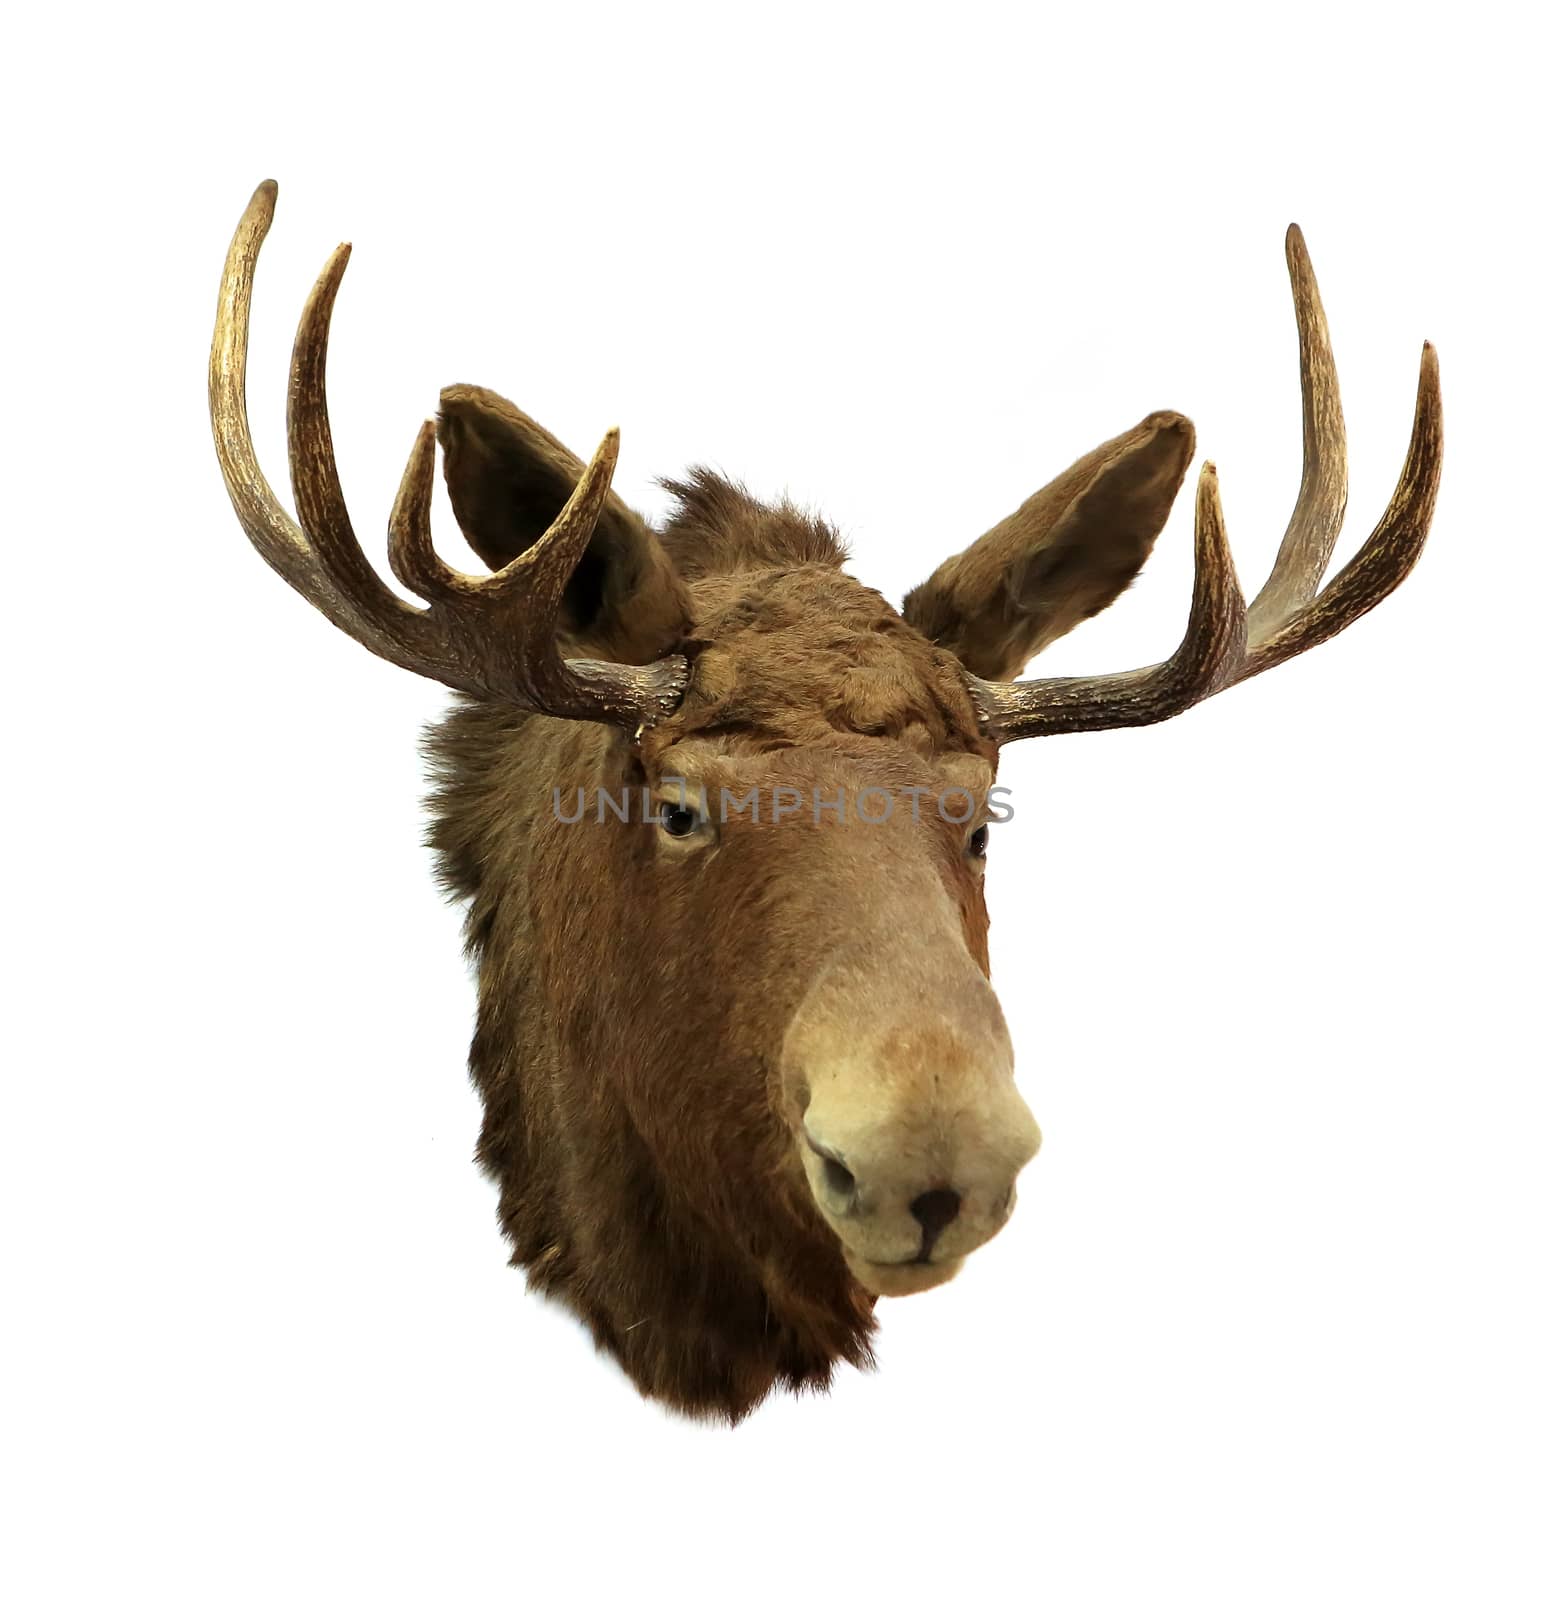 Moose head on a white background (Alces alces), isolated